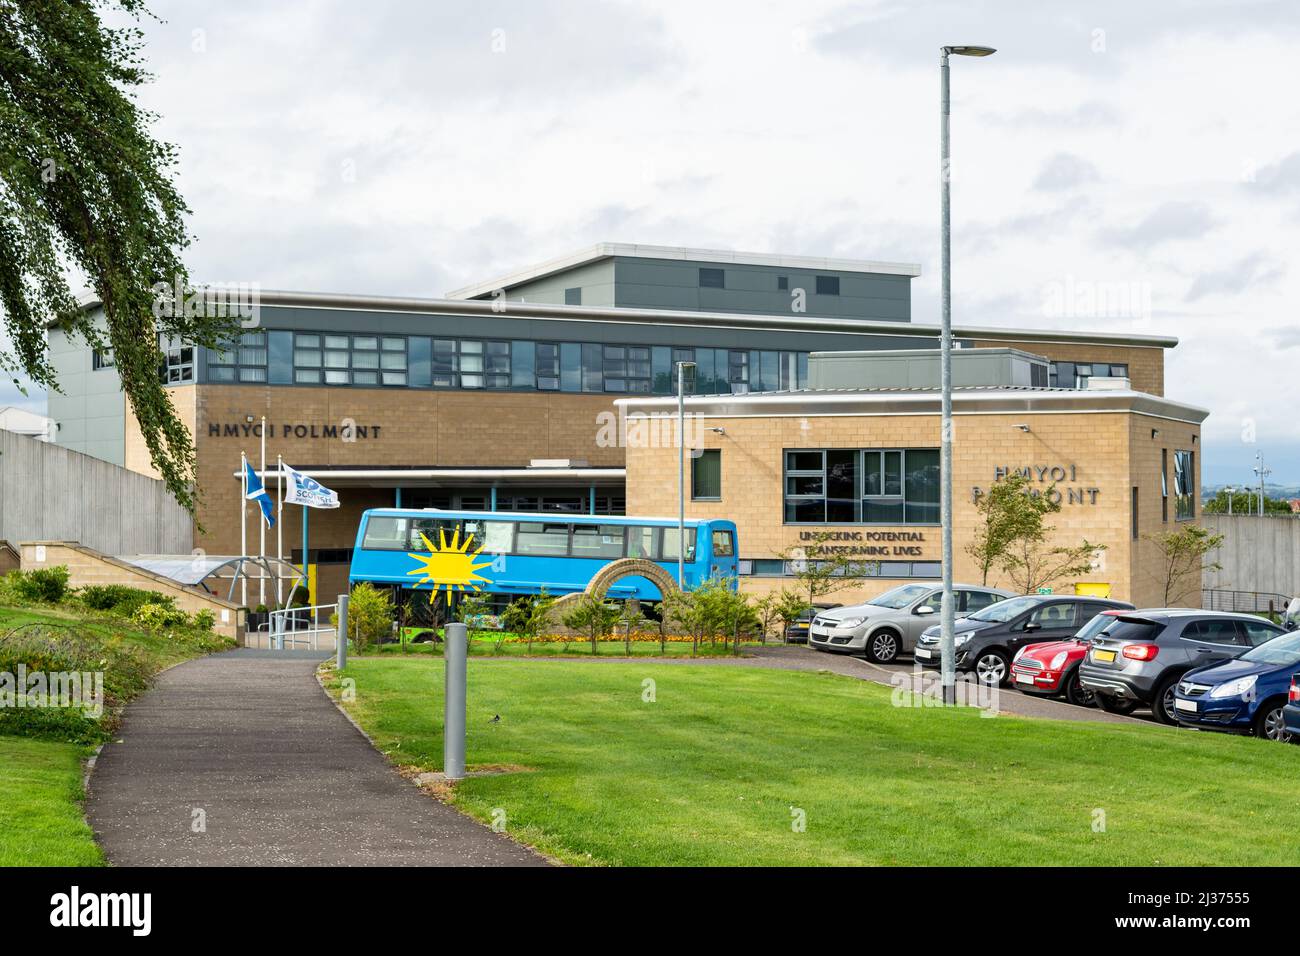 Polmont Young Offenders Institution, Polmont, Brightons, Falkirk, Scotland, UK Stock Photo